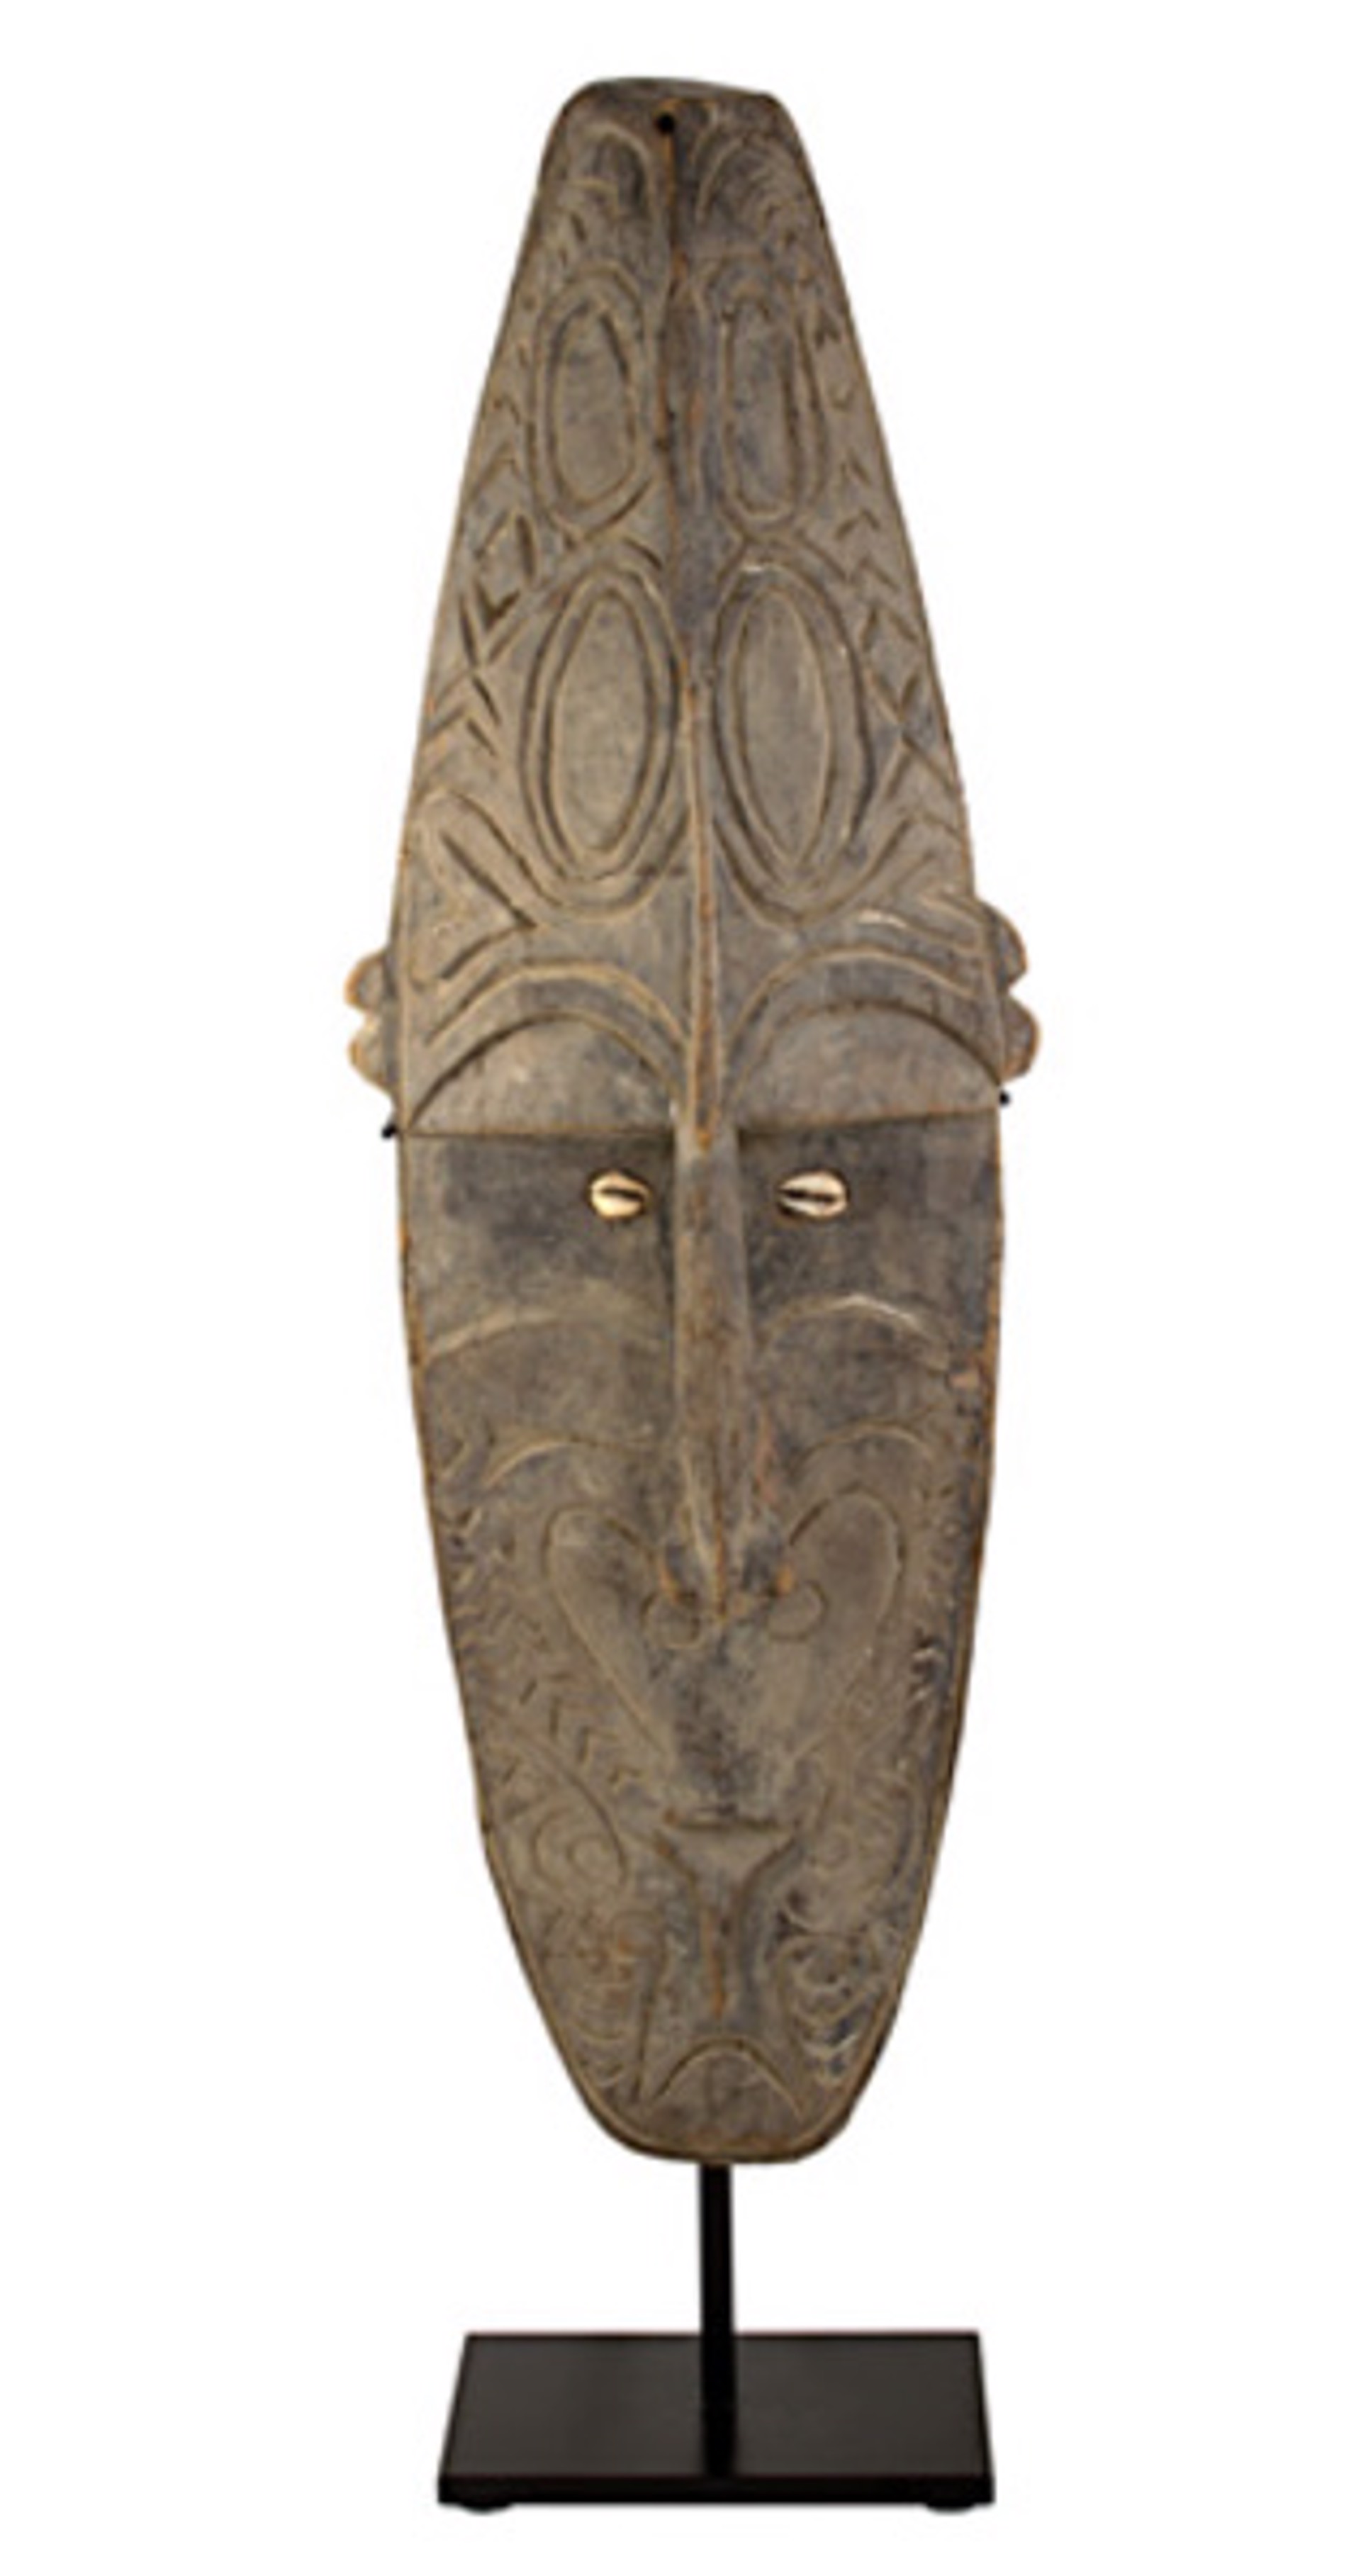 Face Mask by New Guinea